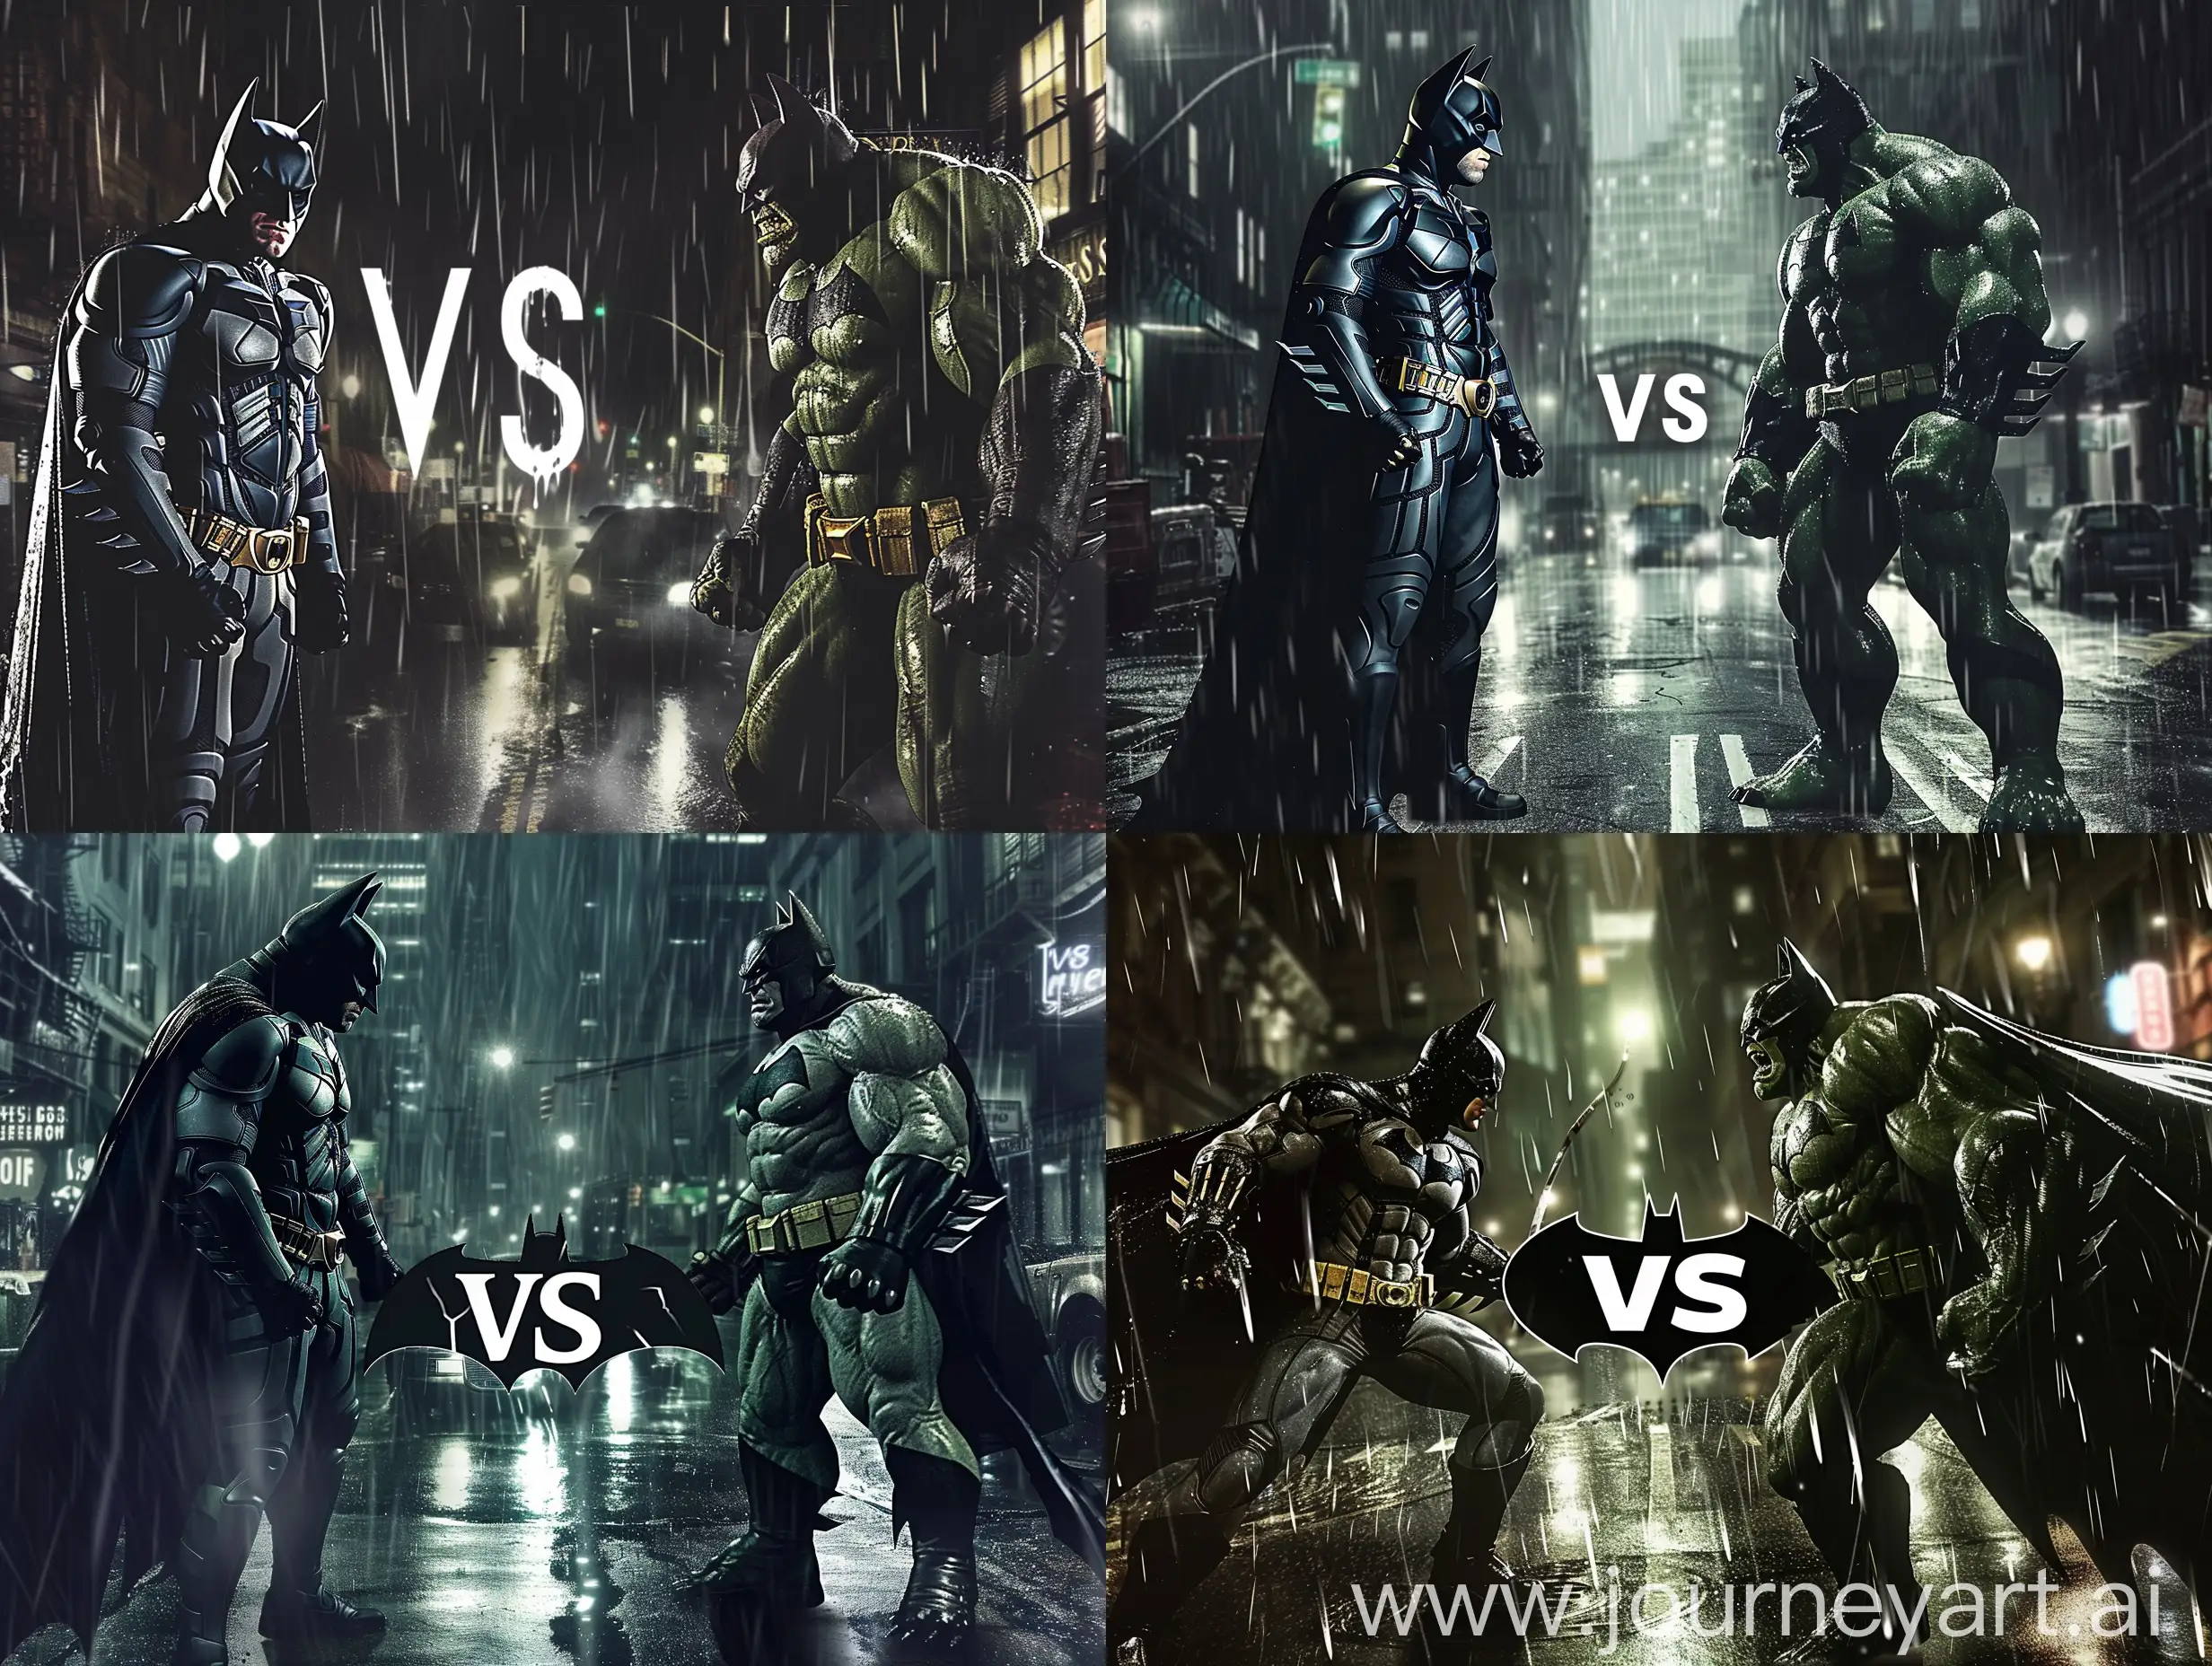 Batman and HULK facing off in a dark street, rain pouring down between them "vs" is prominently displayed in white and BLACK, cinematic, product